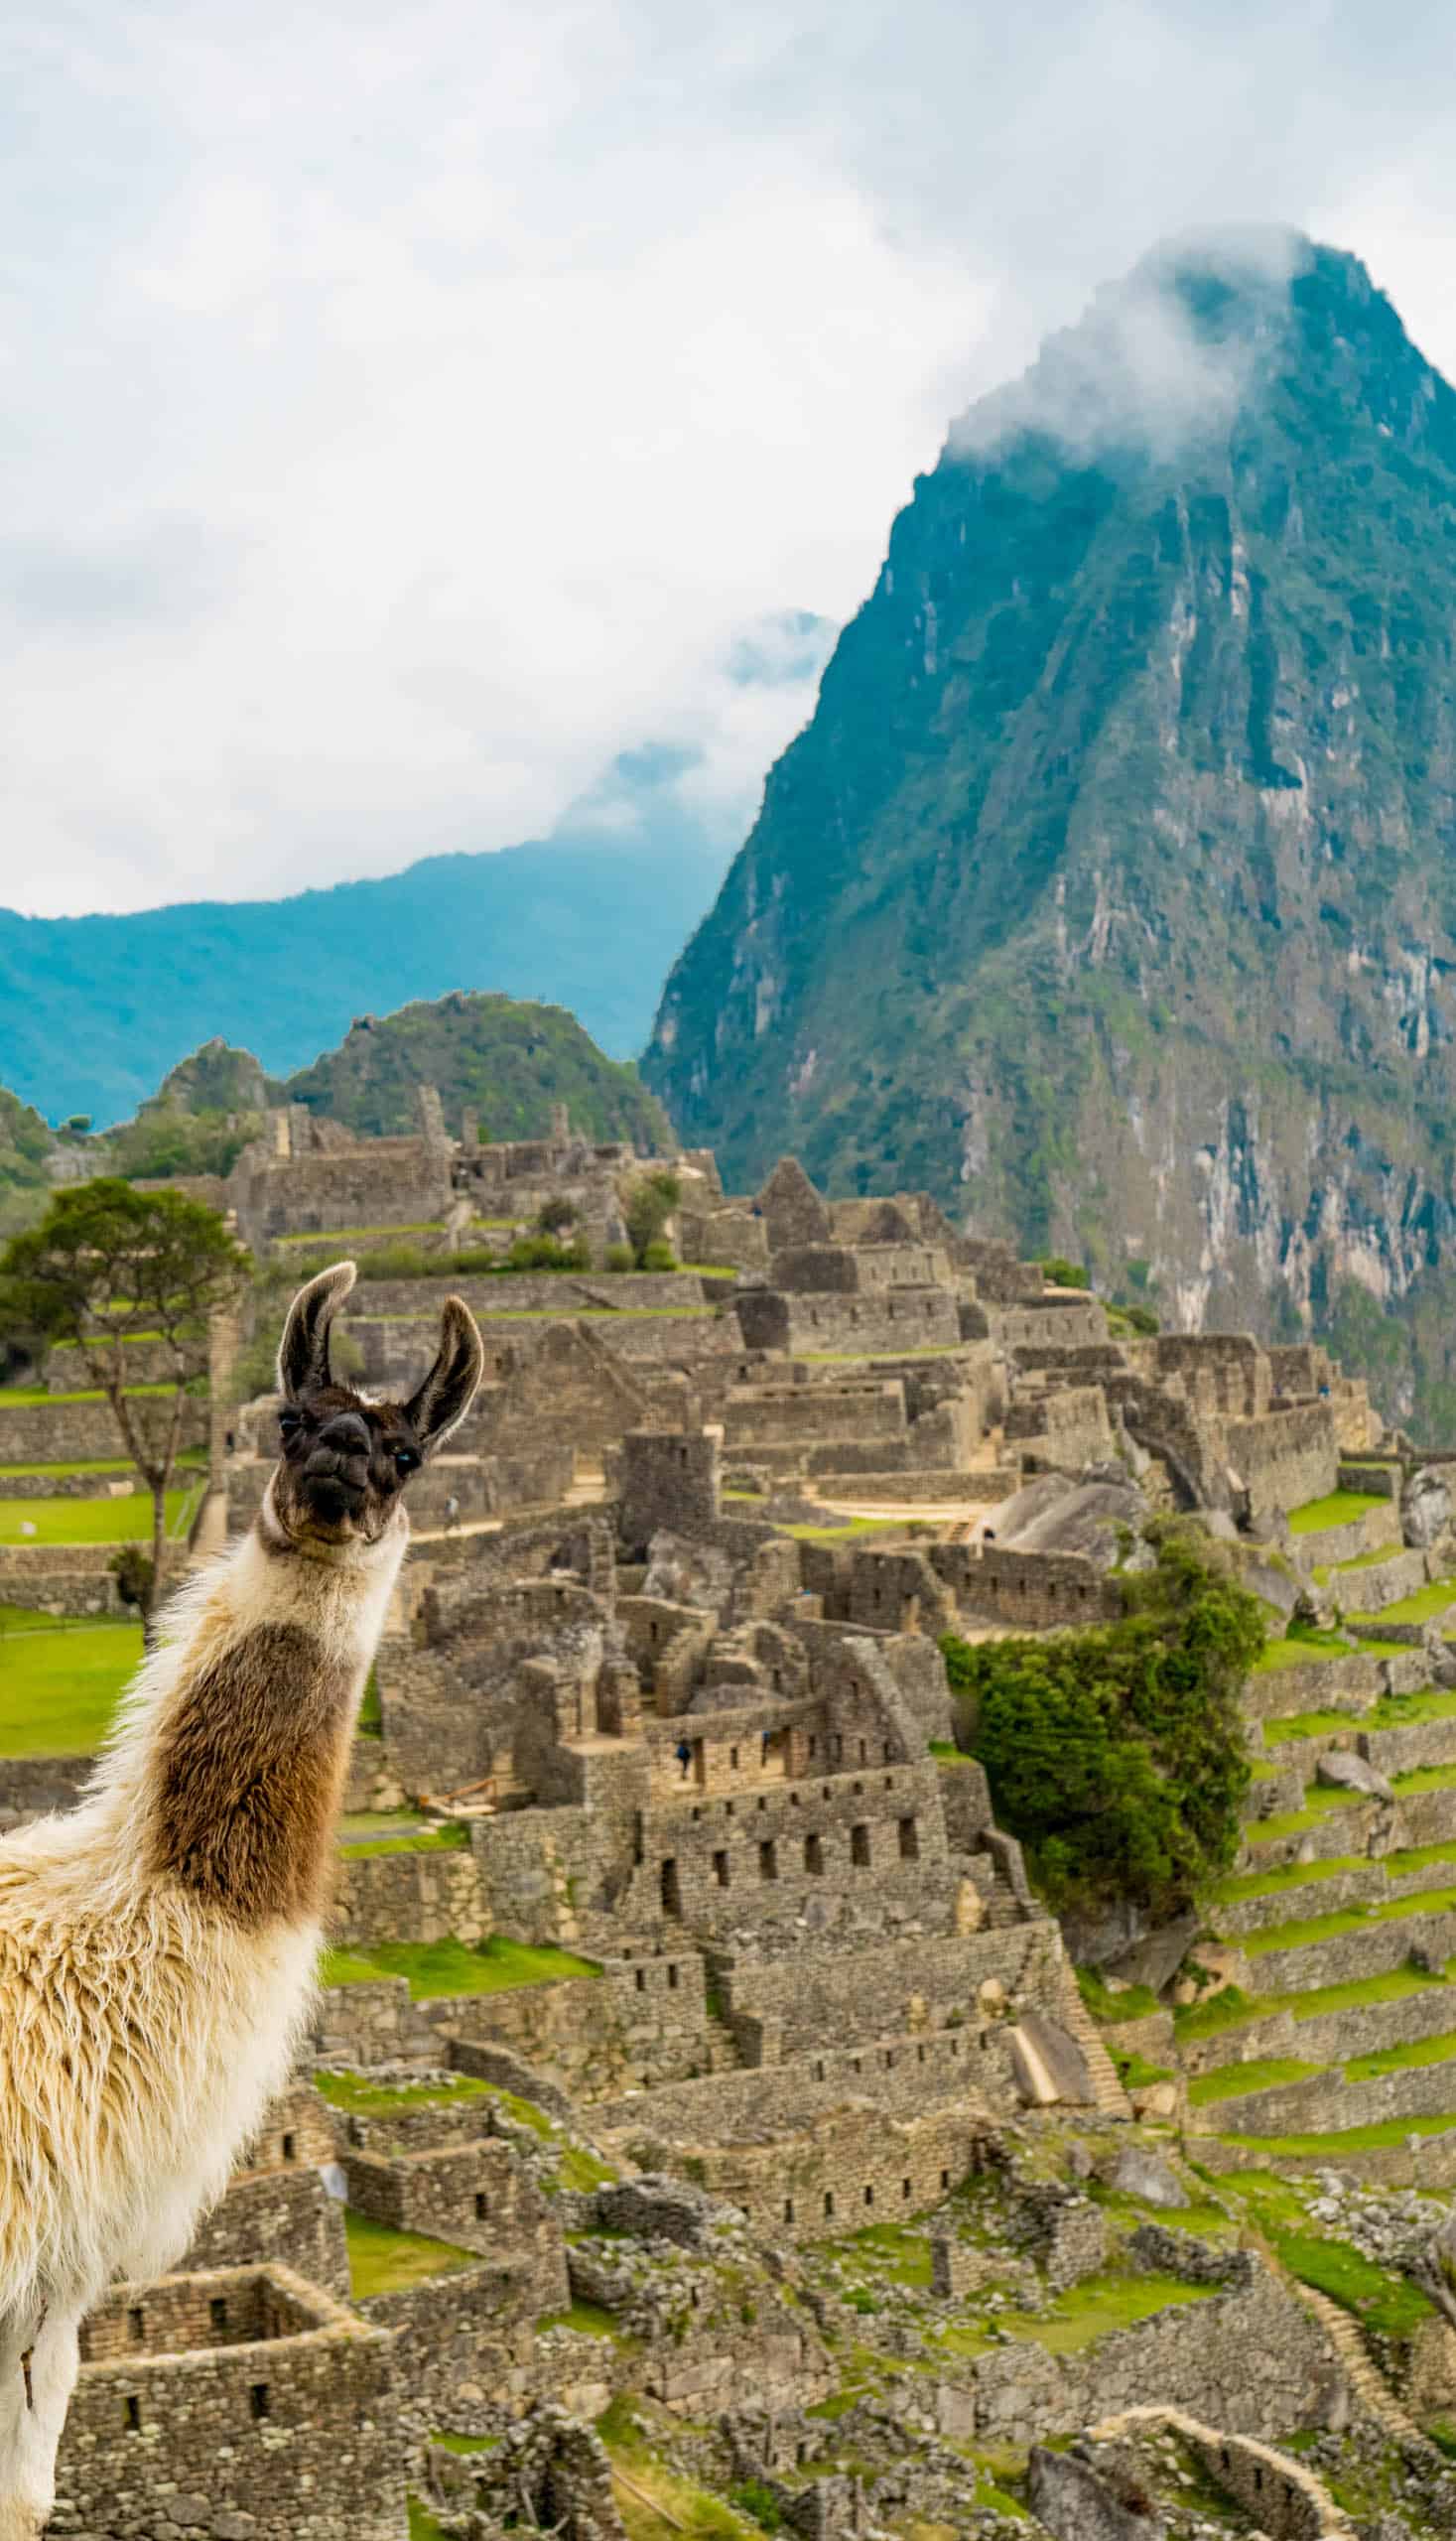 Lama standing in front of Machu Picchu while looking in the camera.